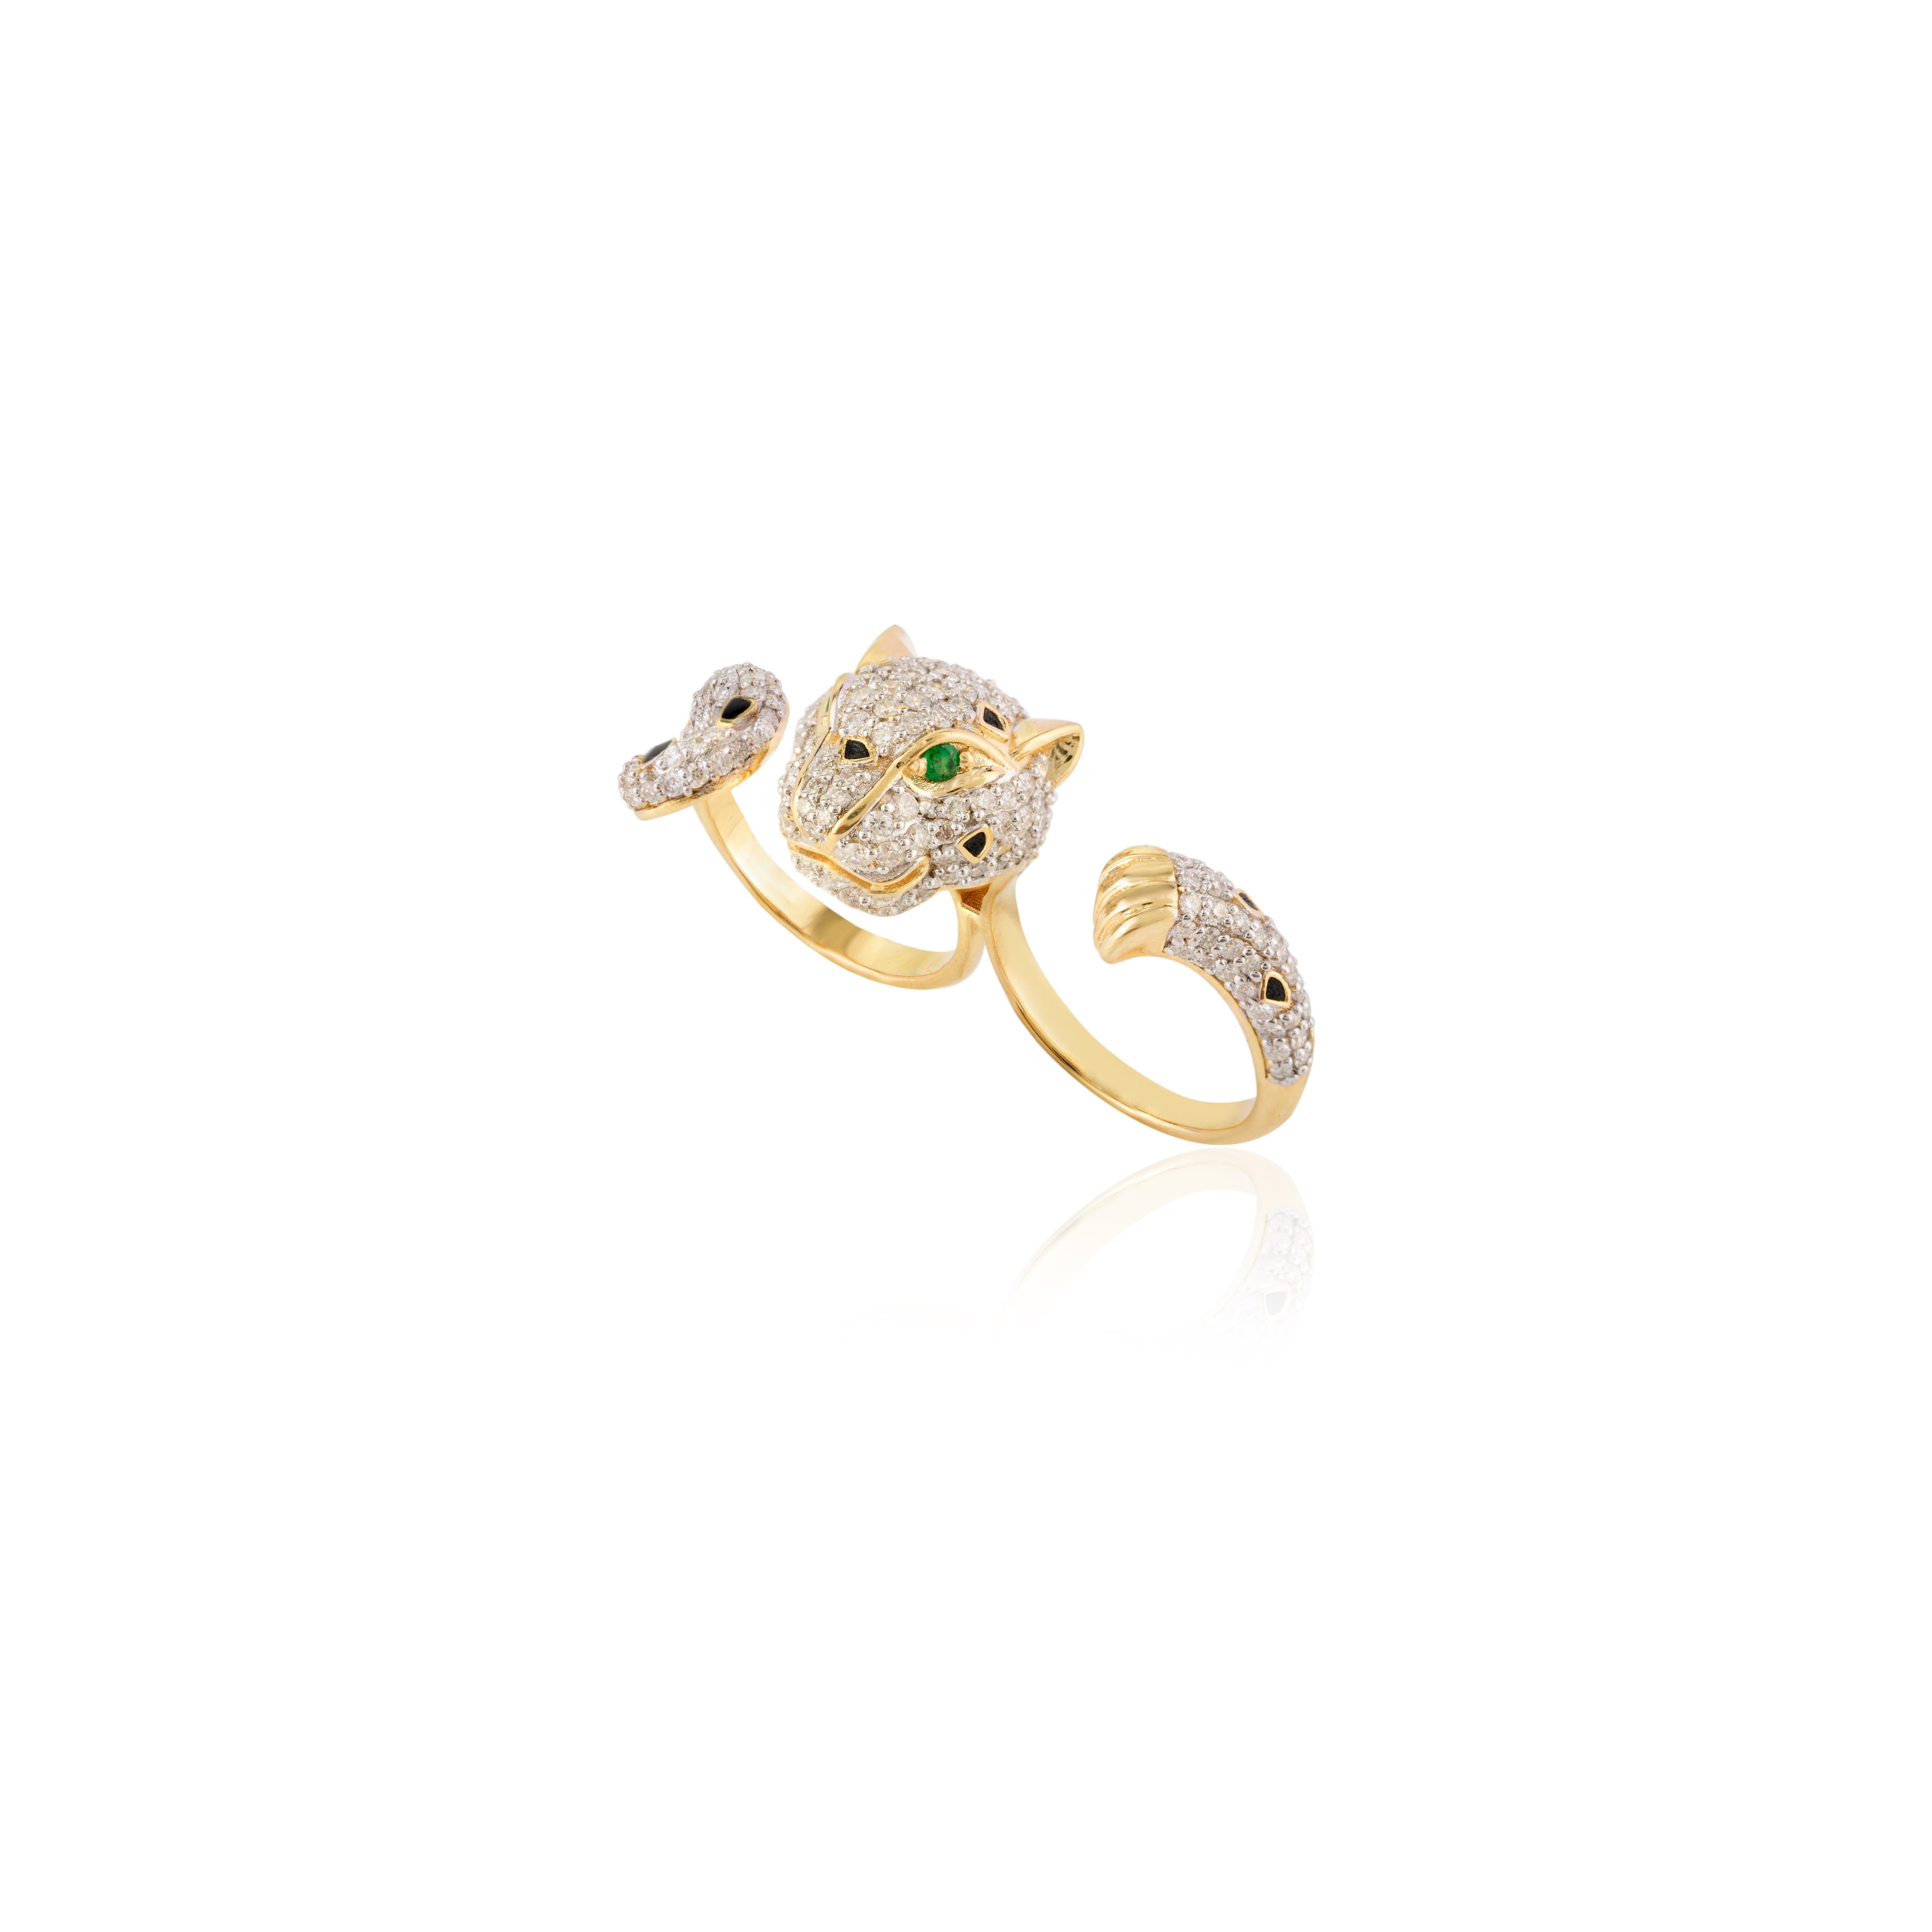 For Sale:  Statement 2.06 Carat Diamond Panther Double Finger Ring in 18k Yellow Gold 9